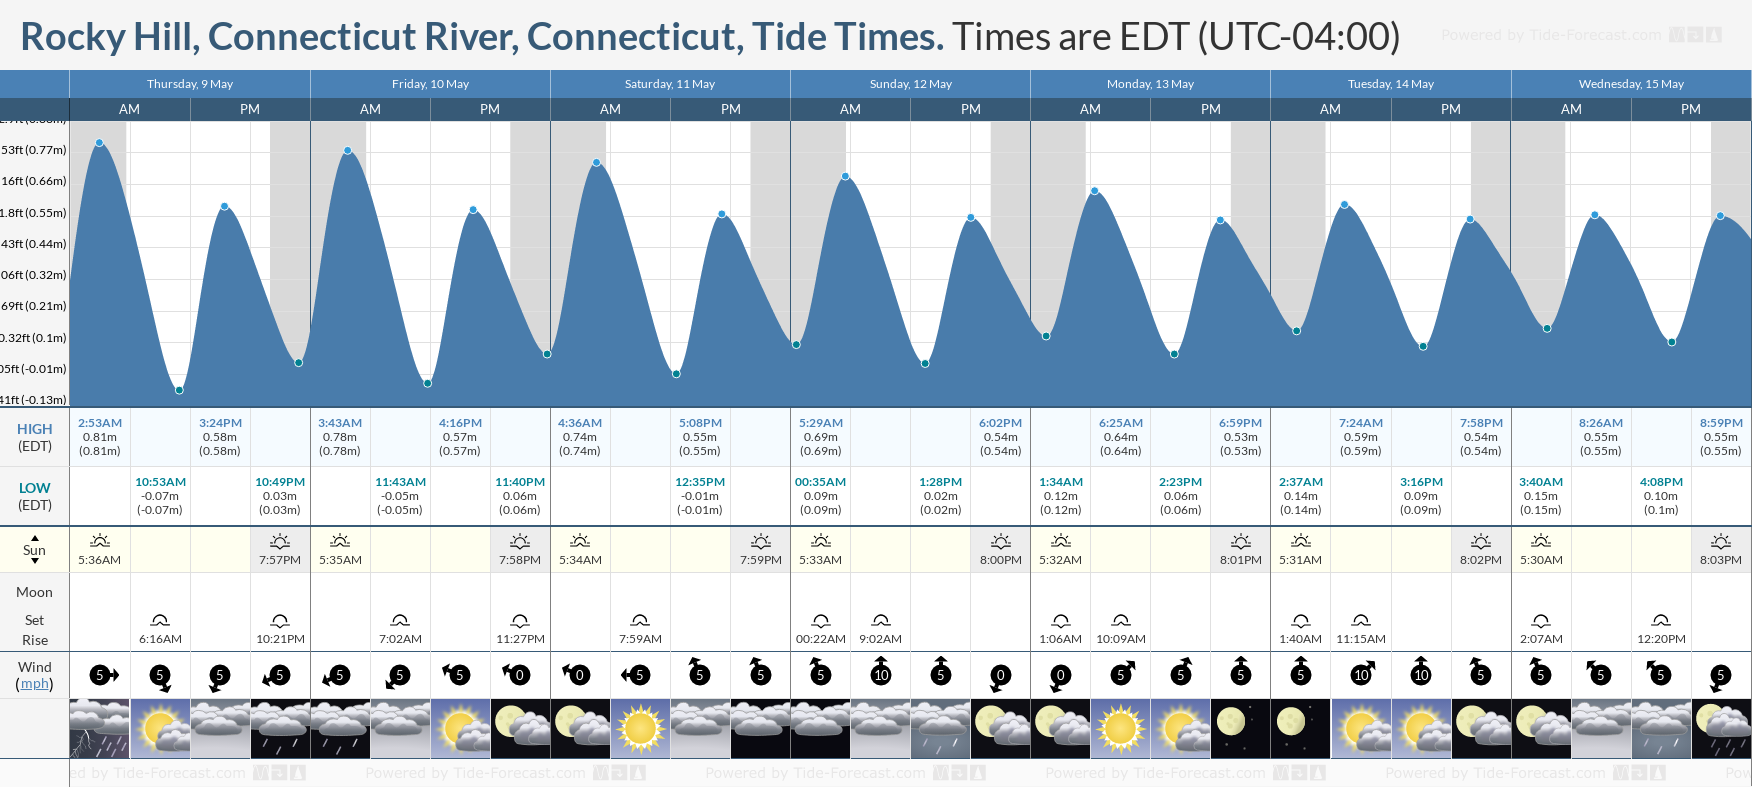 Rocky Hill, Connecticut River, Connecticut Tide Chart including high and low tide tide times for the next 7 days